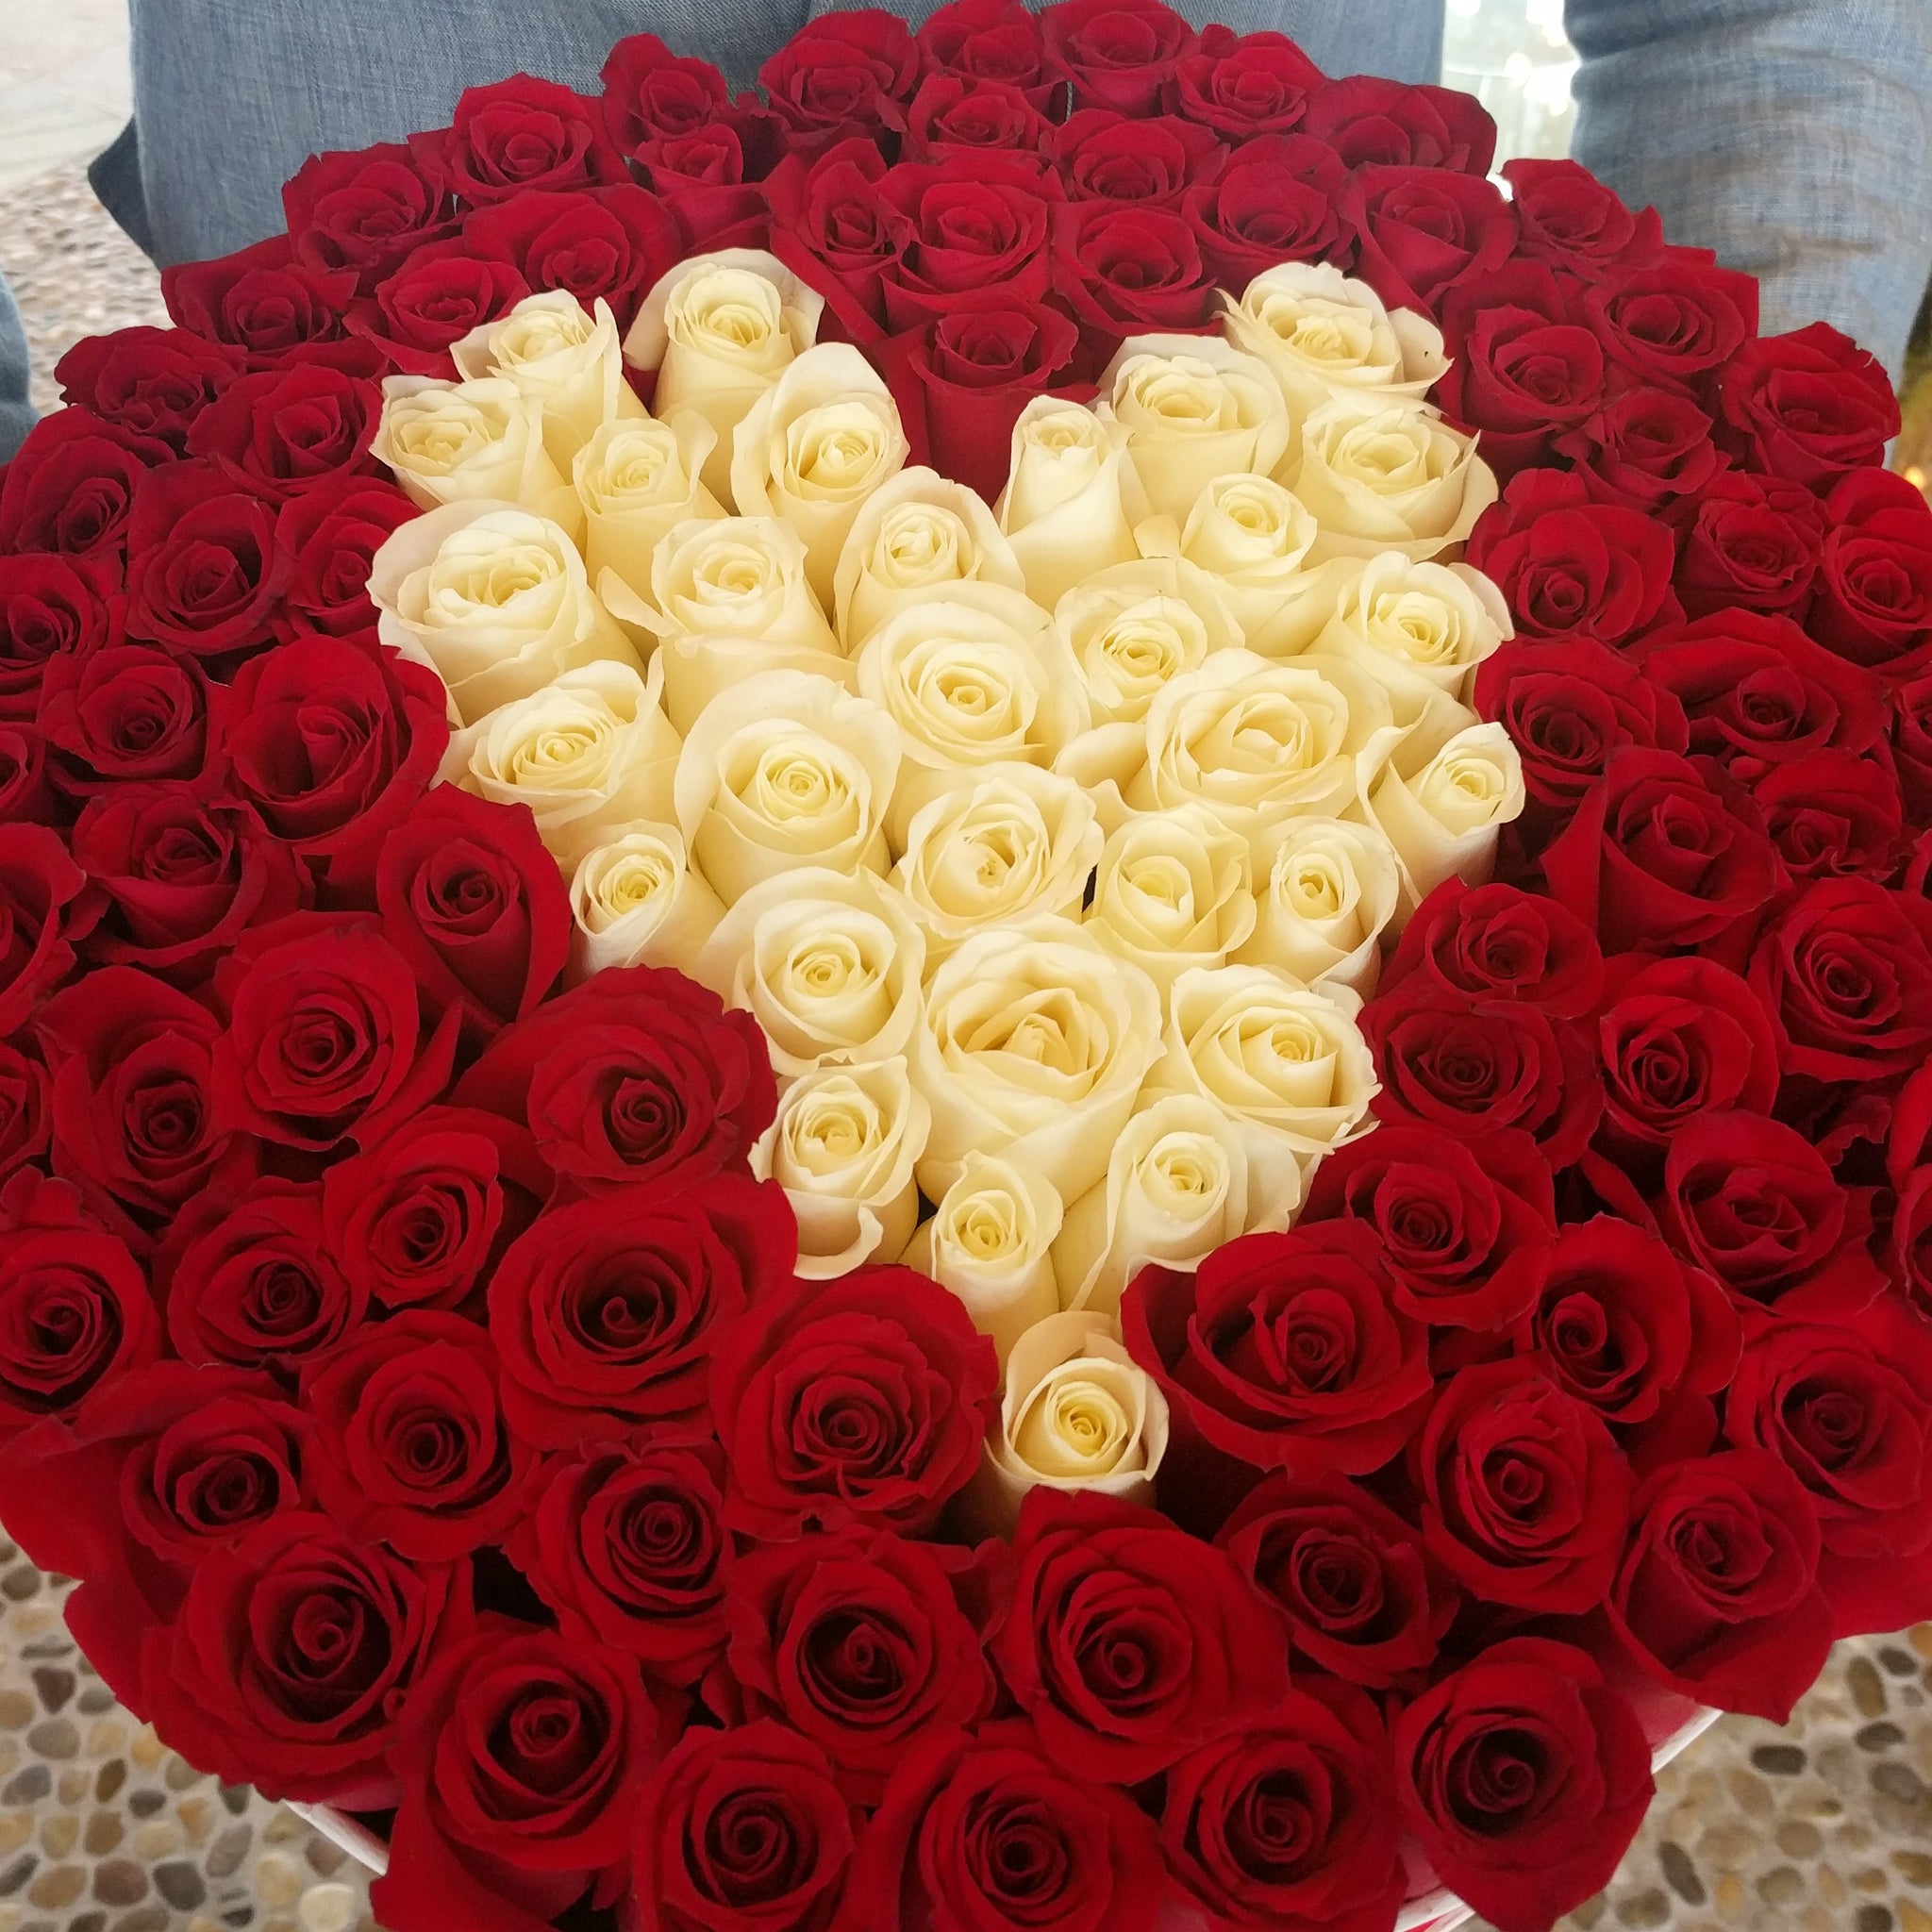 Happy Perfect Roses Day!